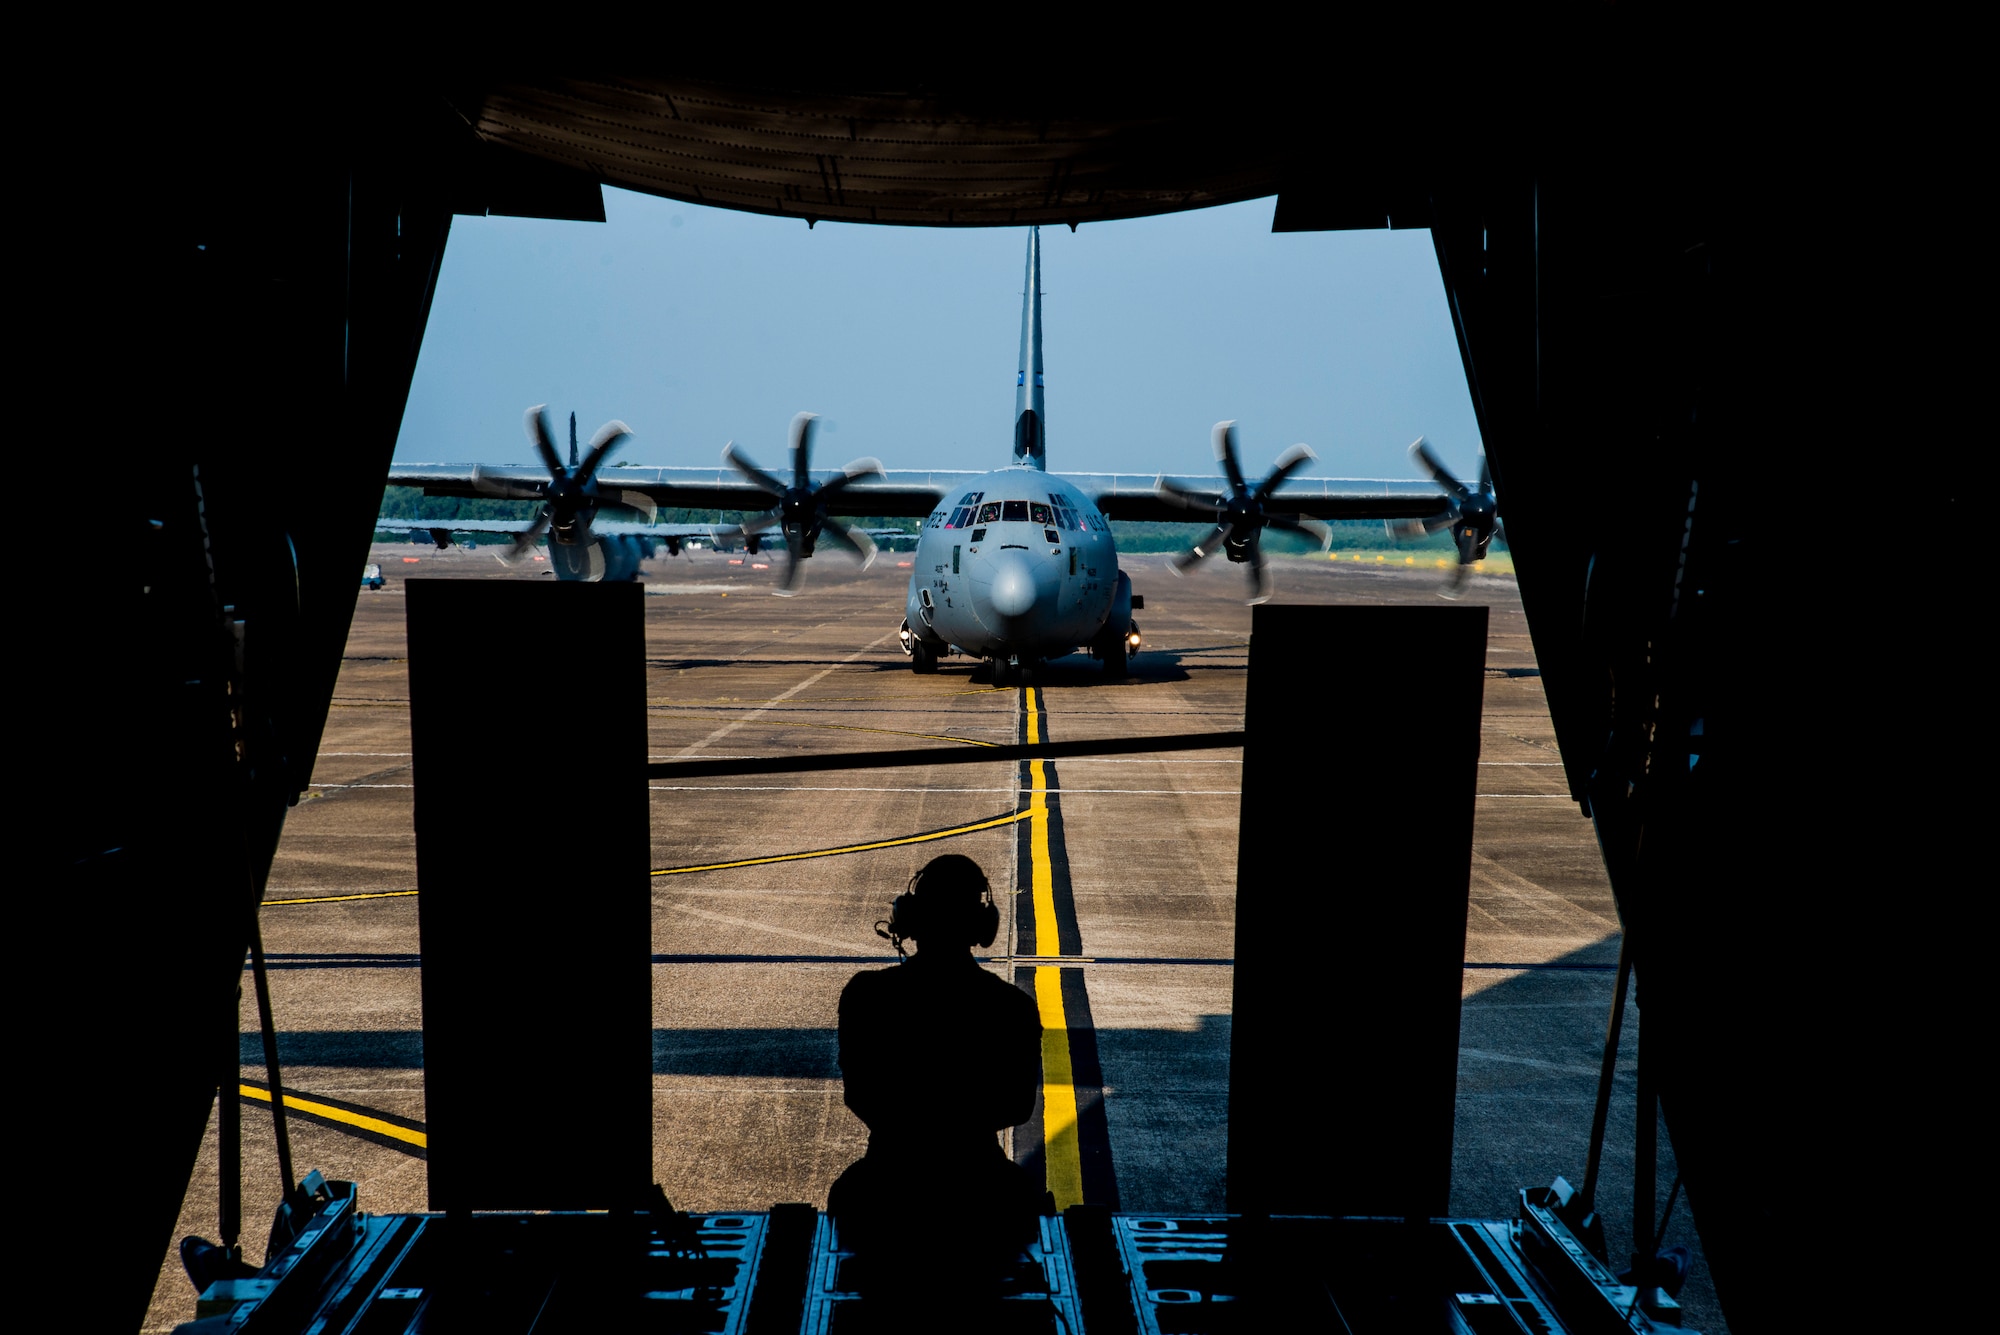 Staff Sgt. Anthony Miller, 327th Airlift Squadron loadmaster, rides in the back of a C-130J as it taxis the runway at Little Rock Air Force Base, Ark. August 7, 2019. The C-130J Hercules crew was taking part in a combat airlift competition called the “turkey shoot.” The first part of the competition is loading and unloading a Humvee for time in which Miller was in charge of guiding the Humvee and securing it into the aircraft. The Reserves have one weekend a month, two weeks a year to fulfill training in order to prepare for real world missions and requirements. (U.S. Air Force Reserve Photo by Senior Airman Chase Cannon)